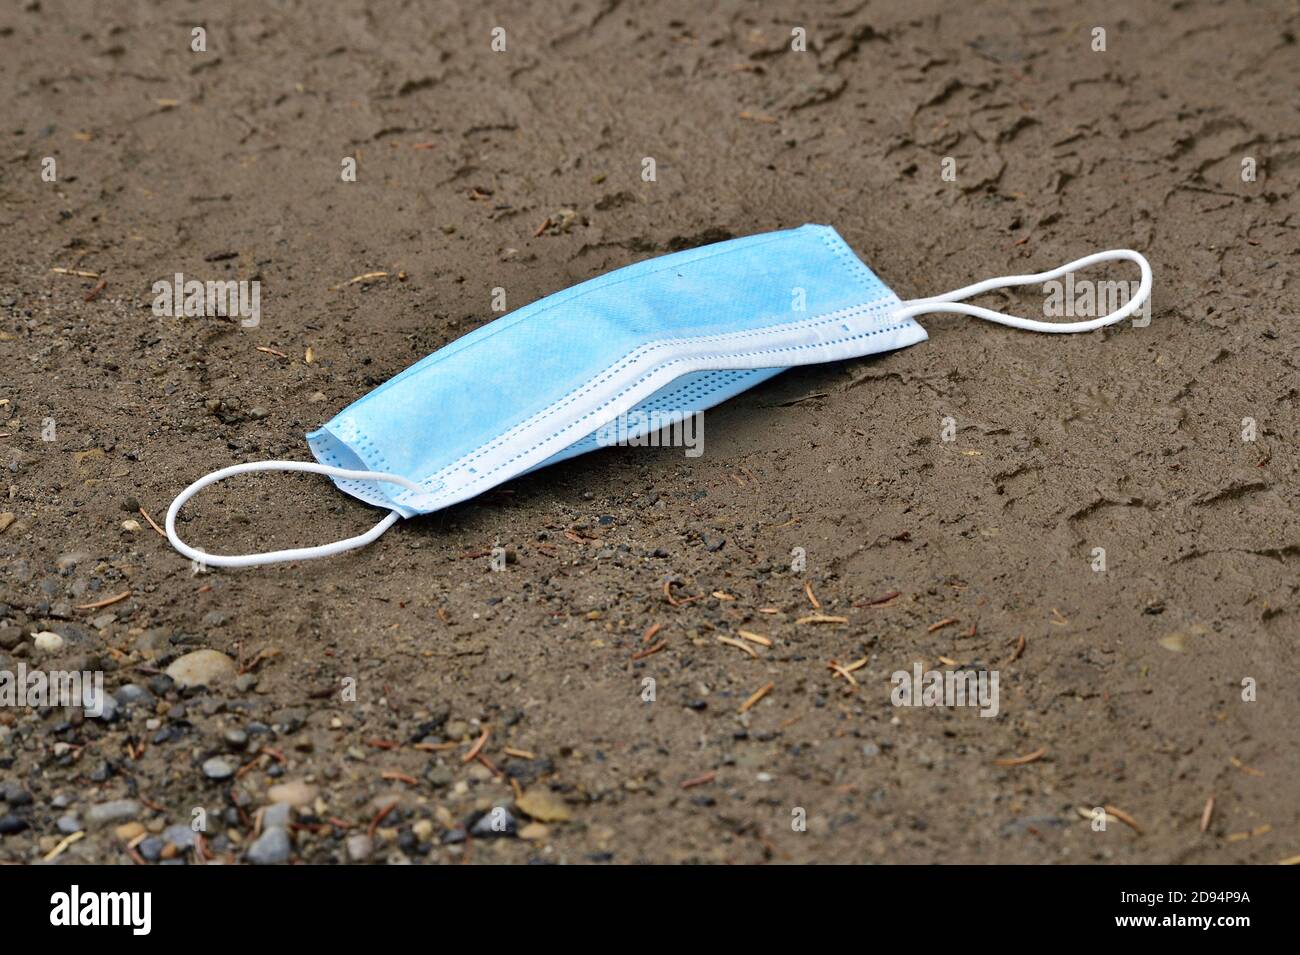 A discarded face mask used to protect a person from the Covid 19 virus then lost or thrown away Stock Photo